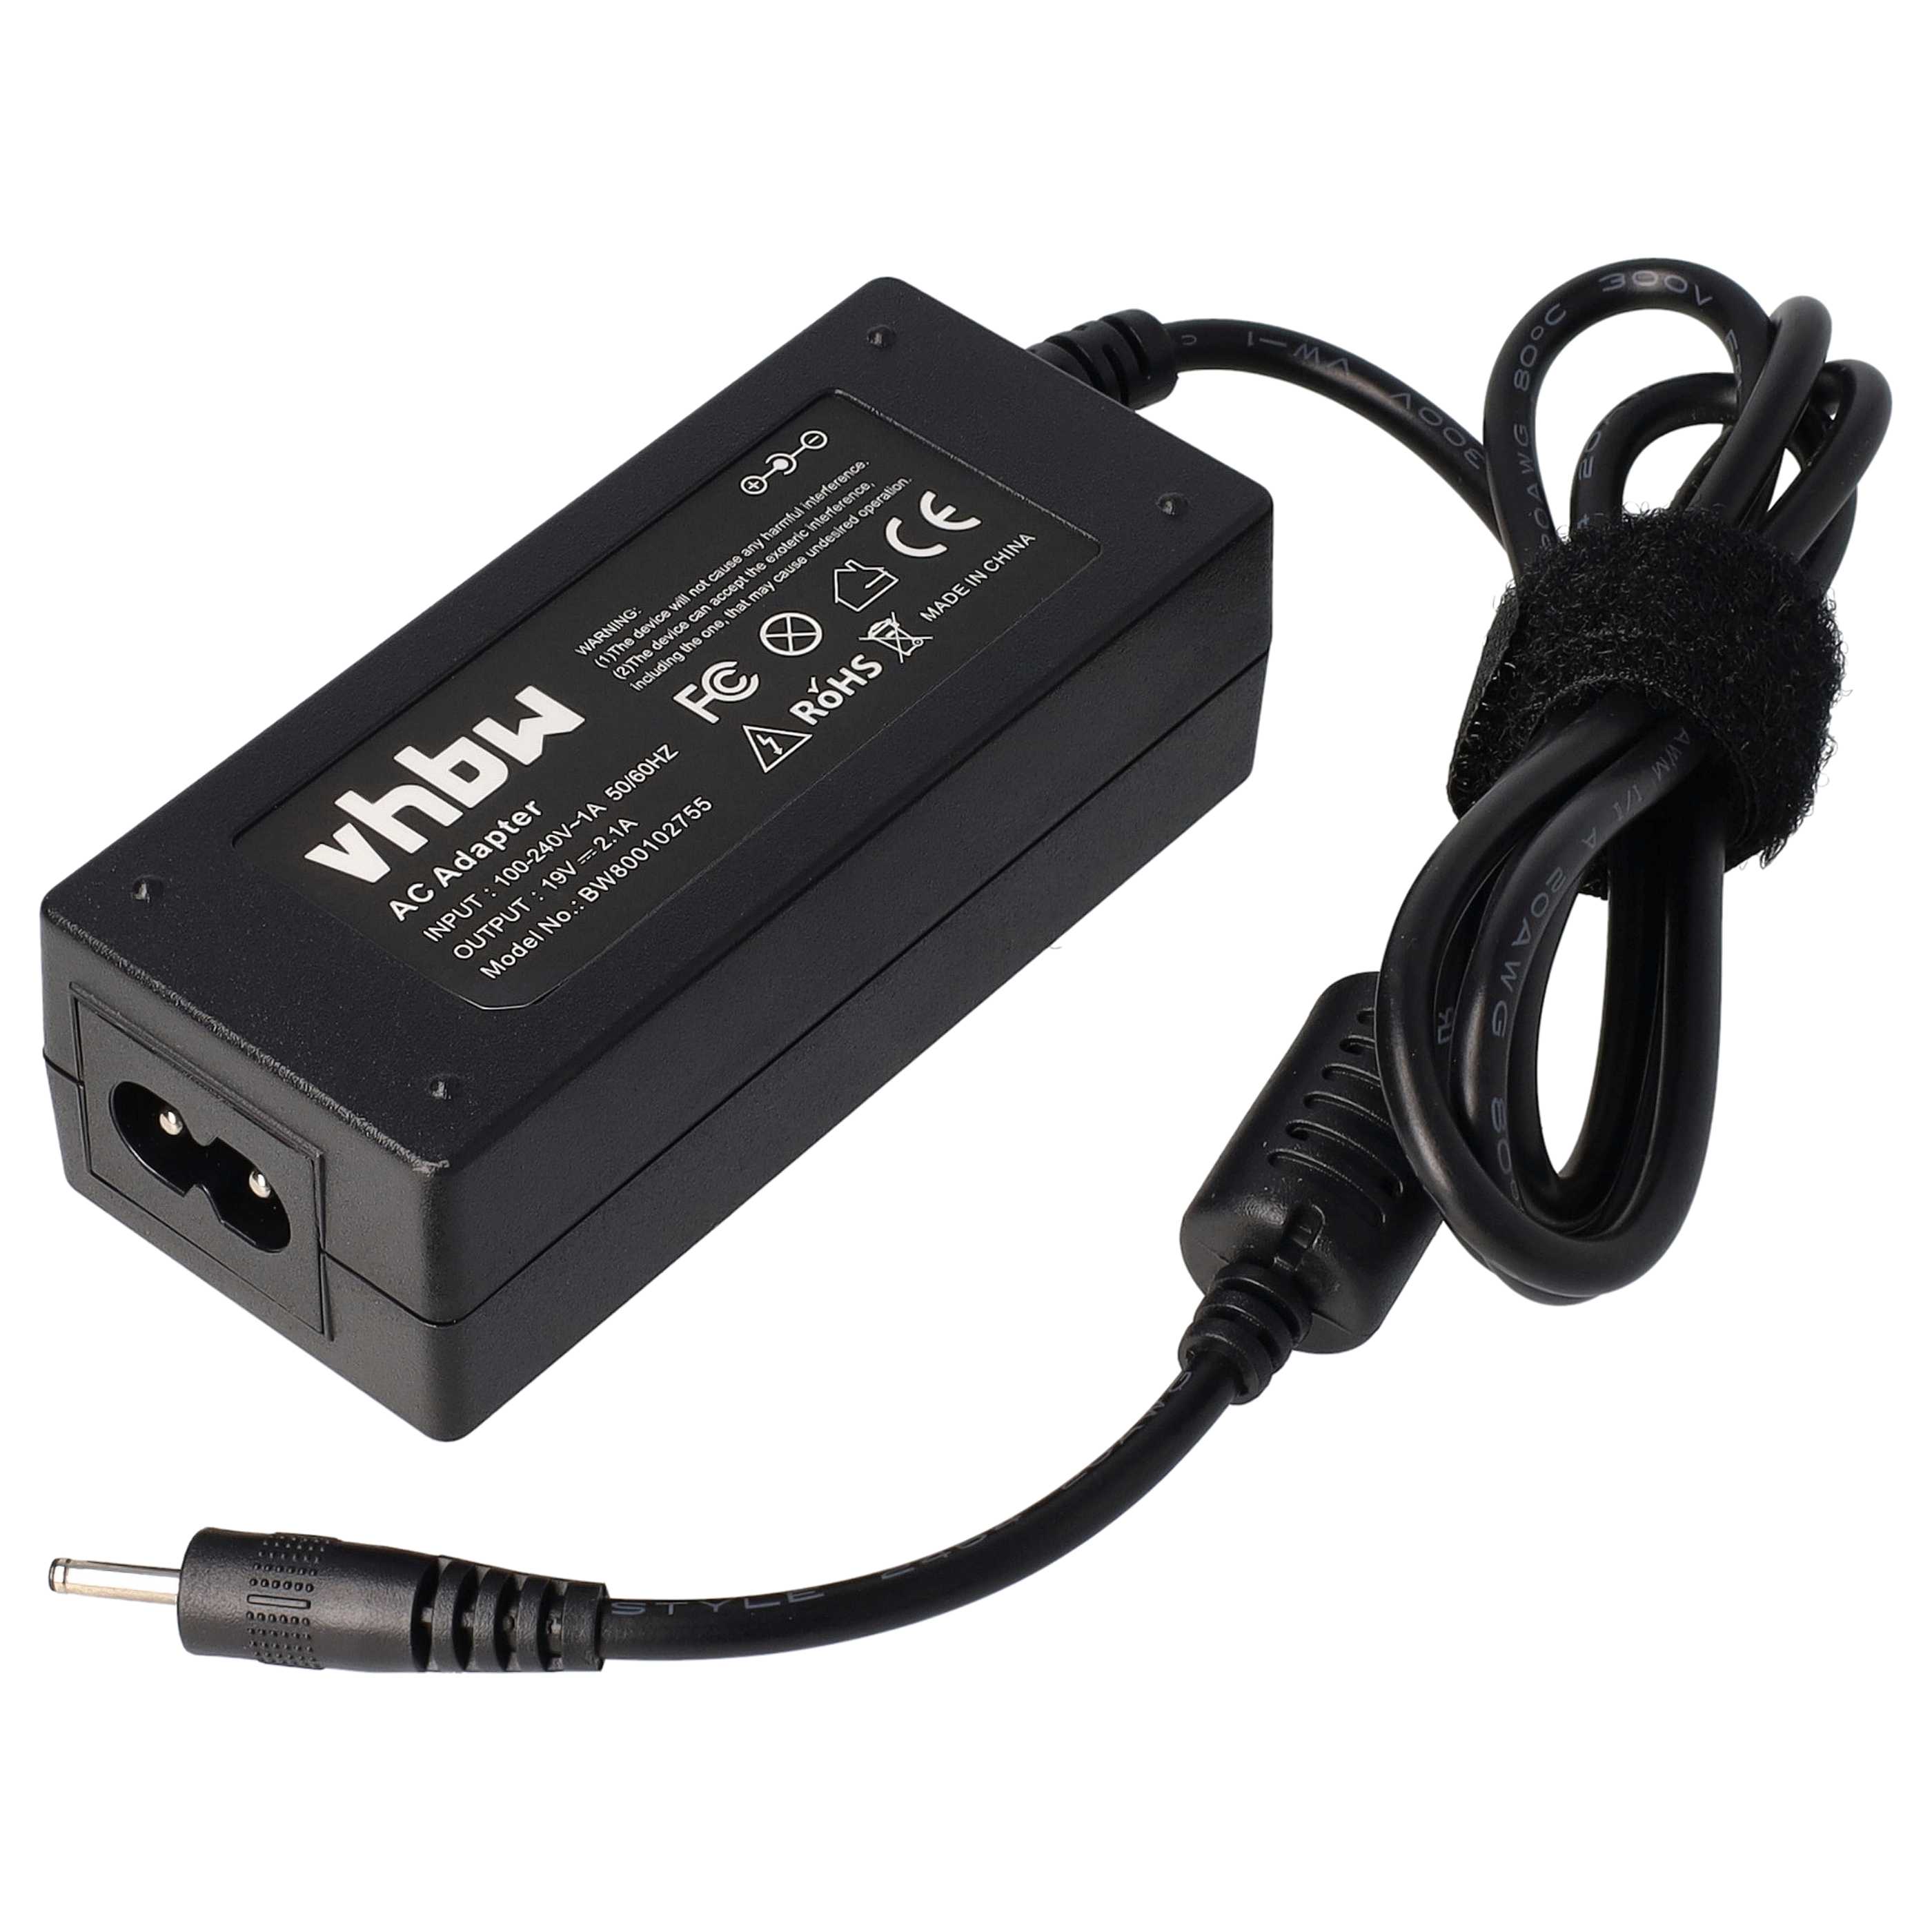 Mains Power Adapter replaces Asus AD6630, 90-XB02OAPW00100Q, ADP-40PH AB, ADP-40HH for AsusNotebook, 40 W